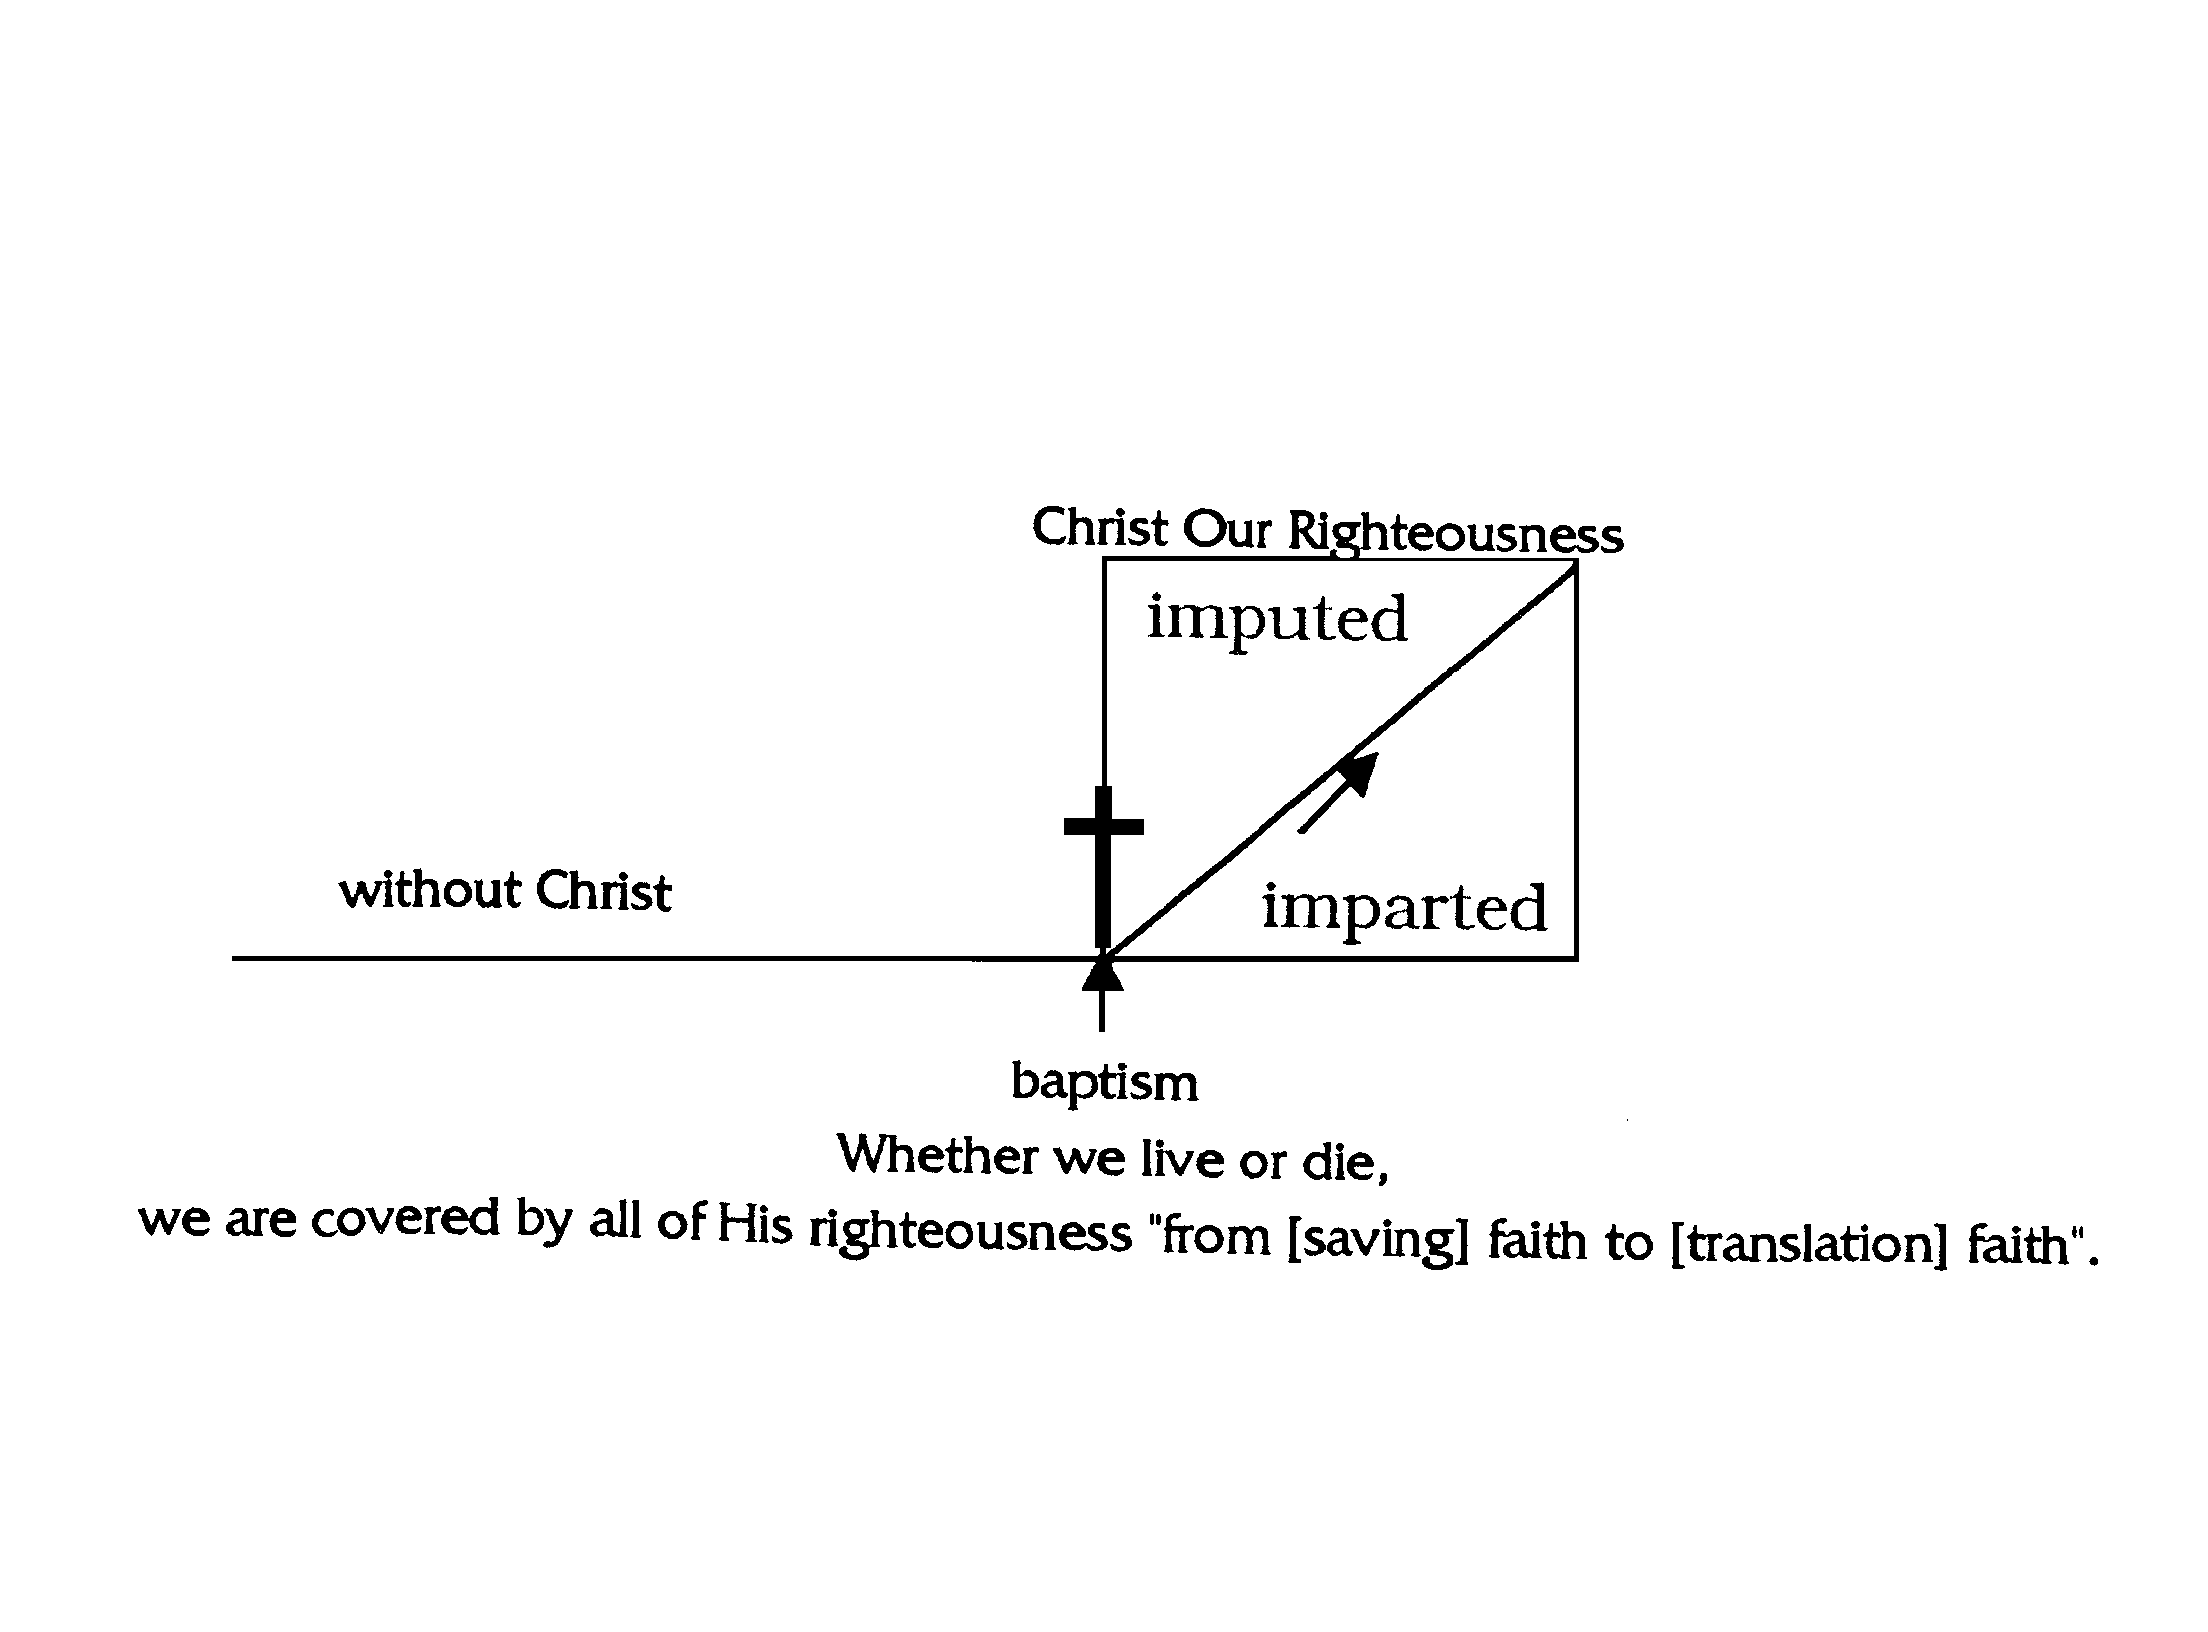 A diagram illustrating grace & righteousness